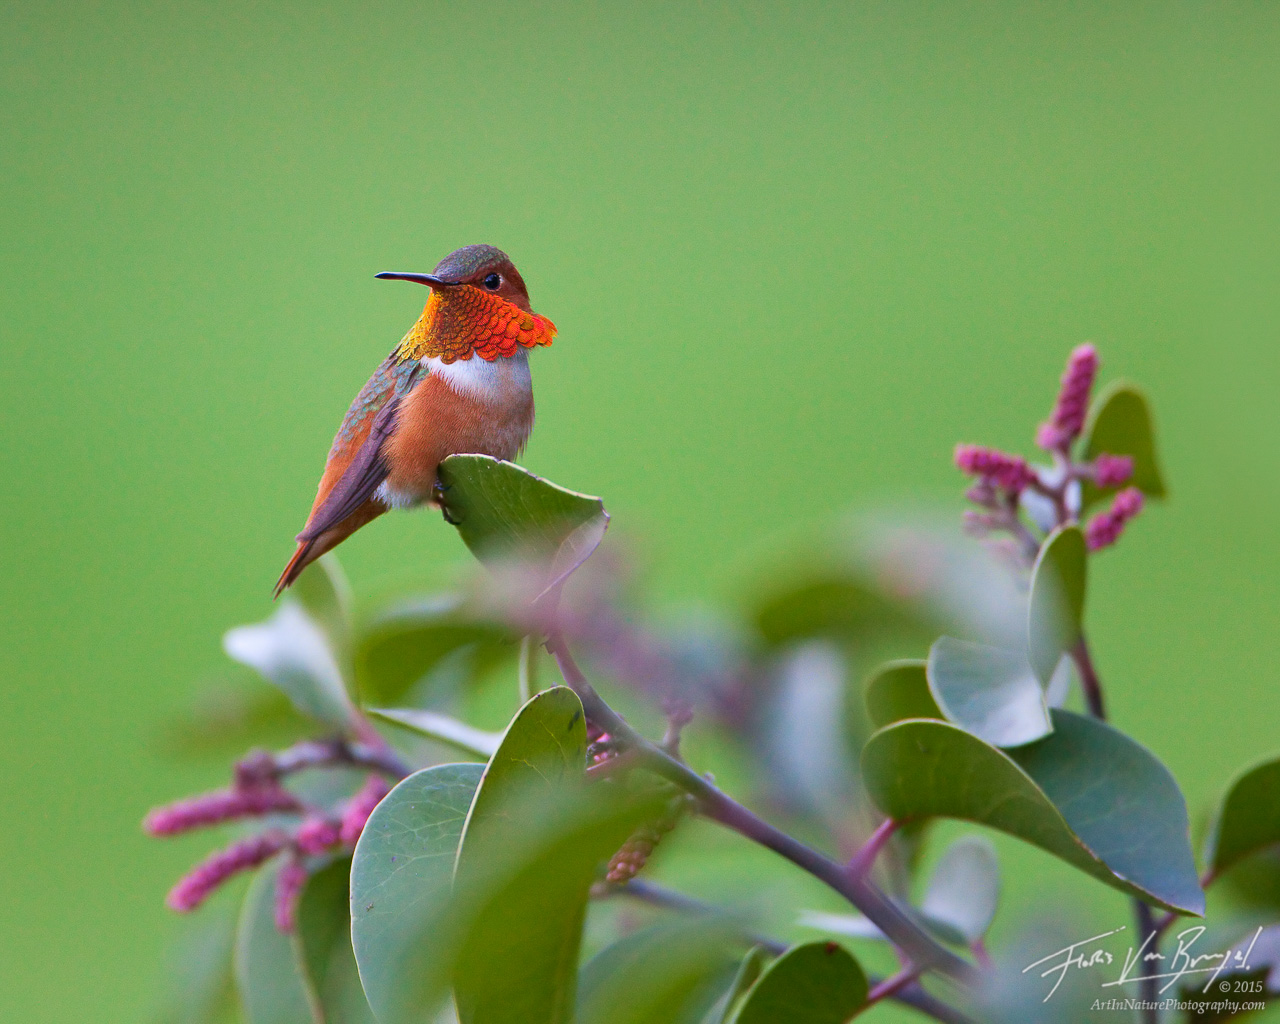 A particularly showy male Rufous Hummingbird (Selasphorus rufus) poses among the fresh spring greens of Pasadena's Arroyo Parkway...